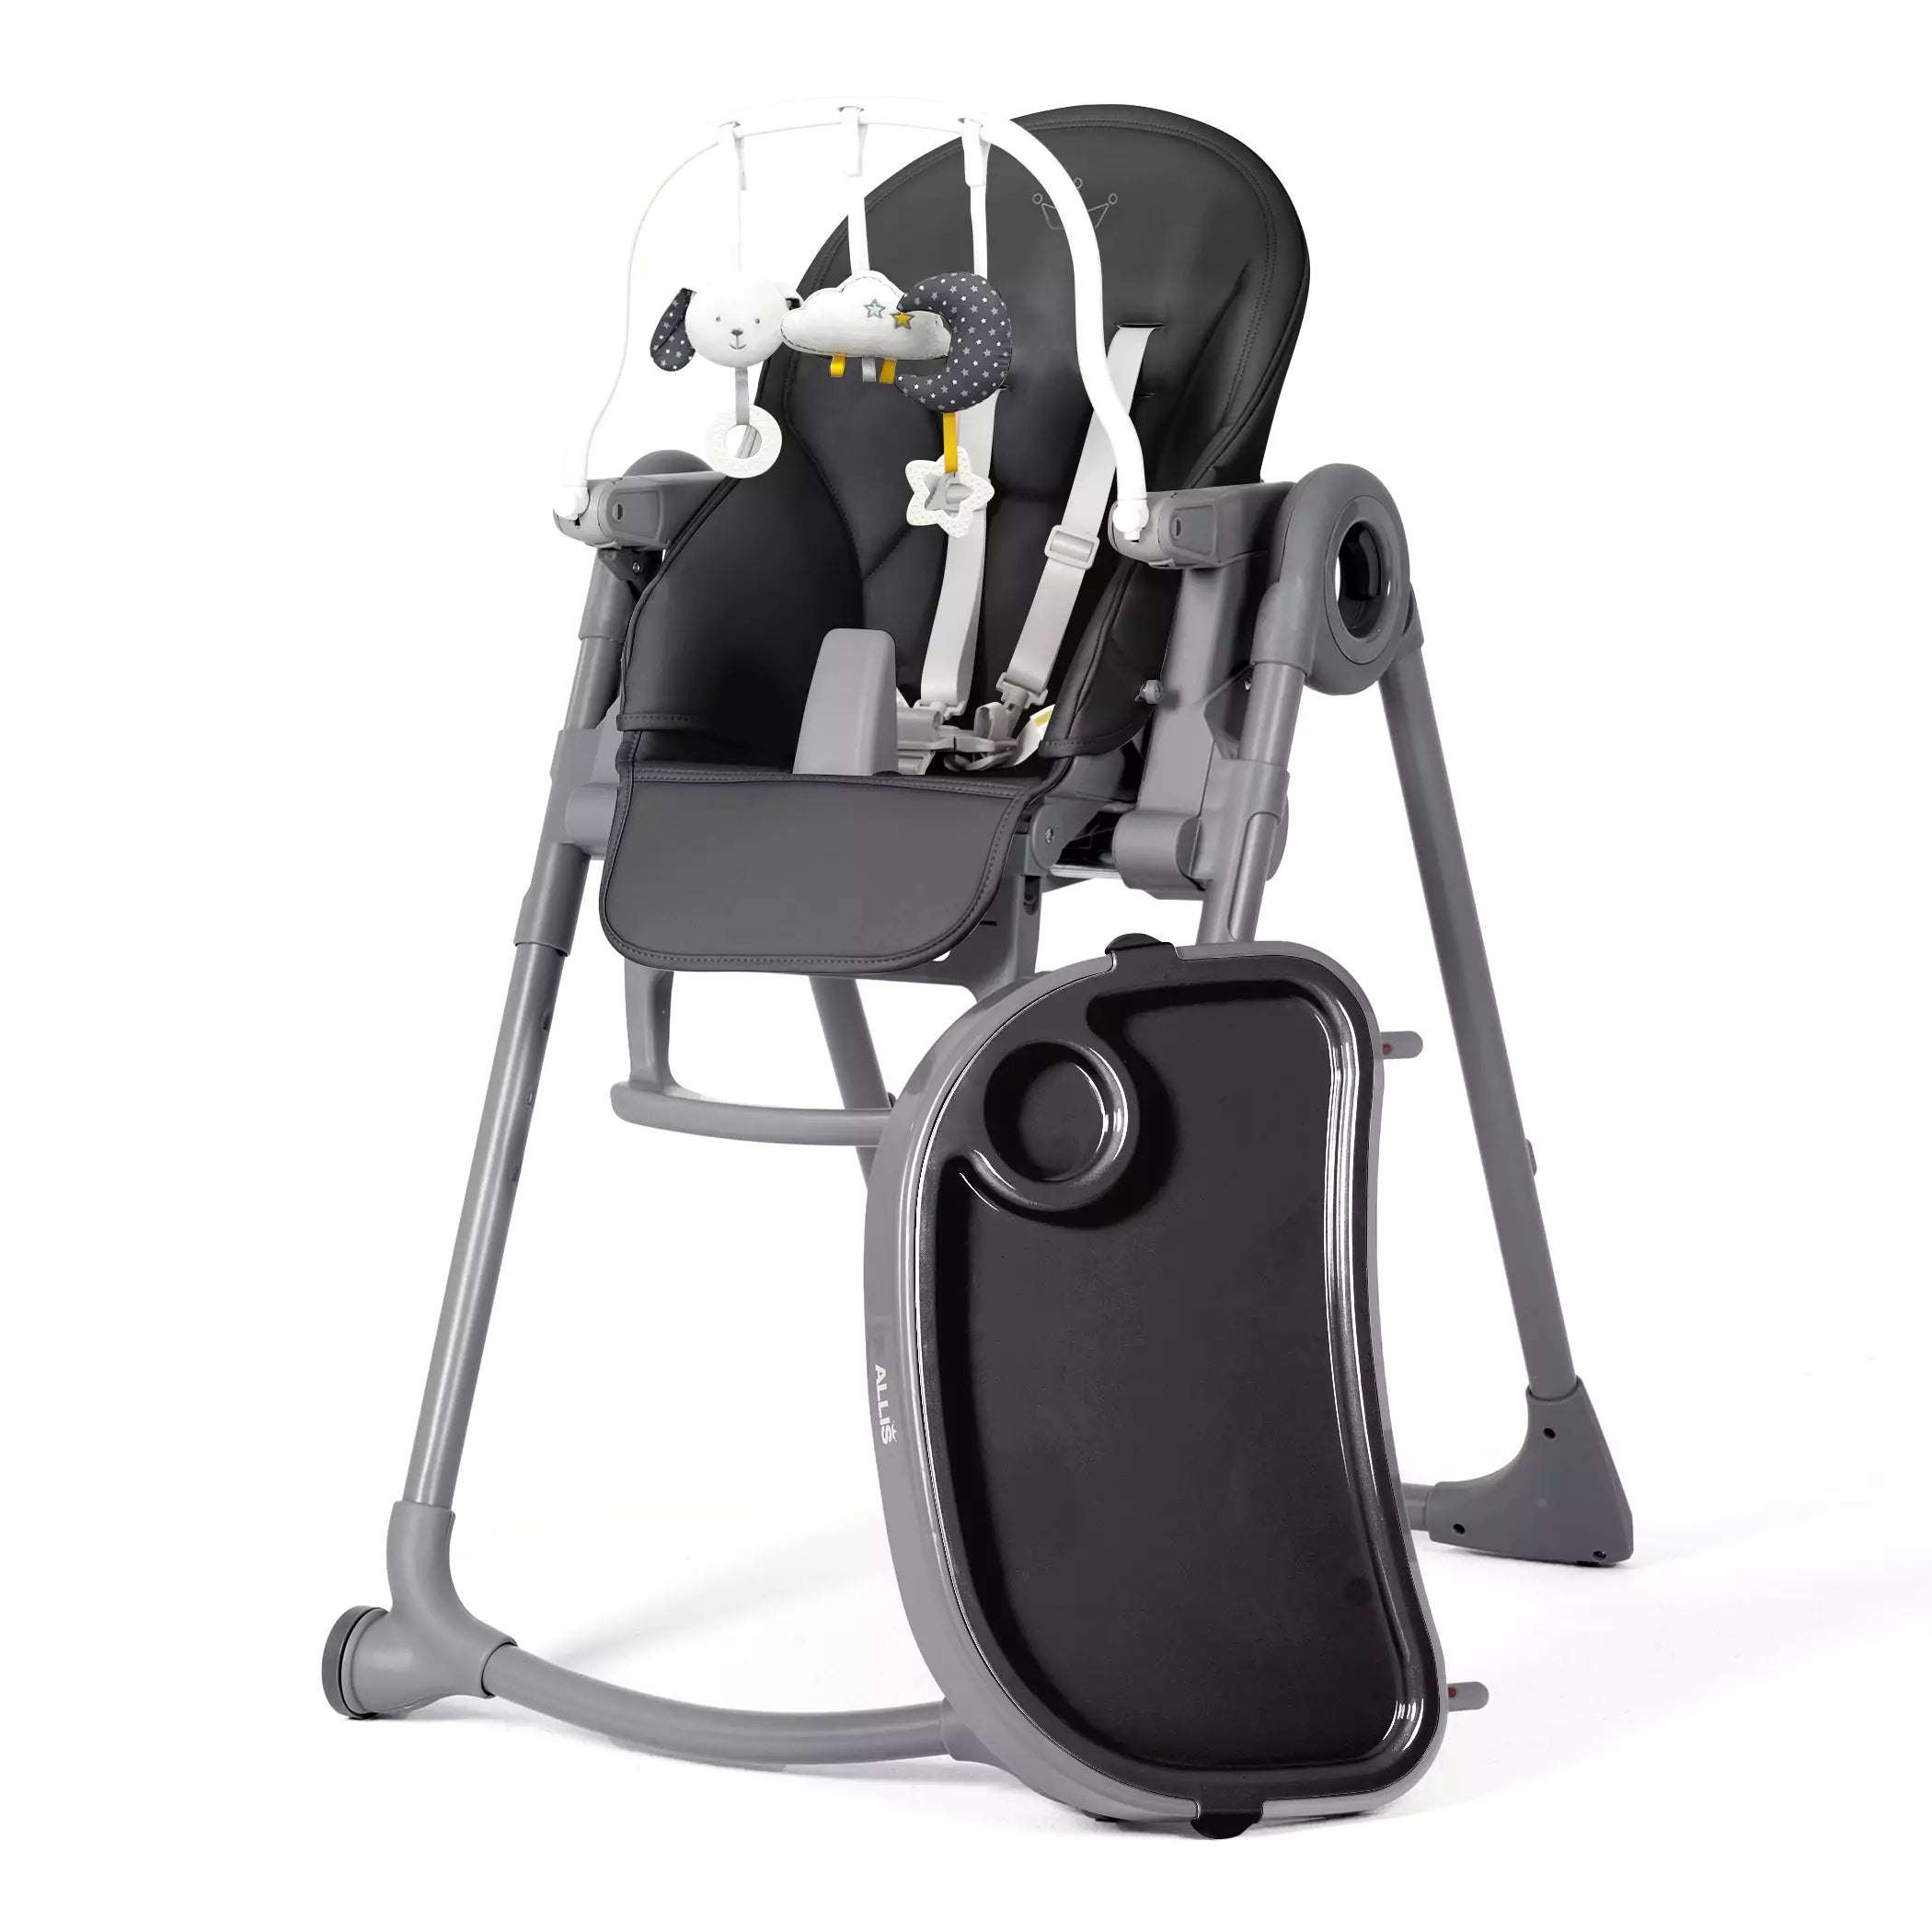 An image of Elegant 2-in-1 Black Baby High Chair - Safe, and Functional